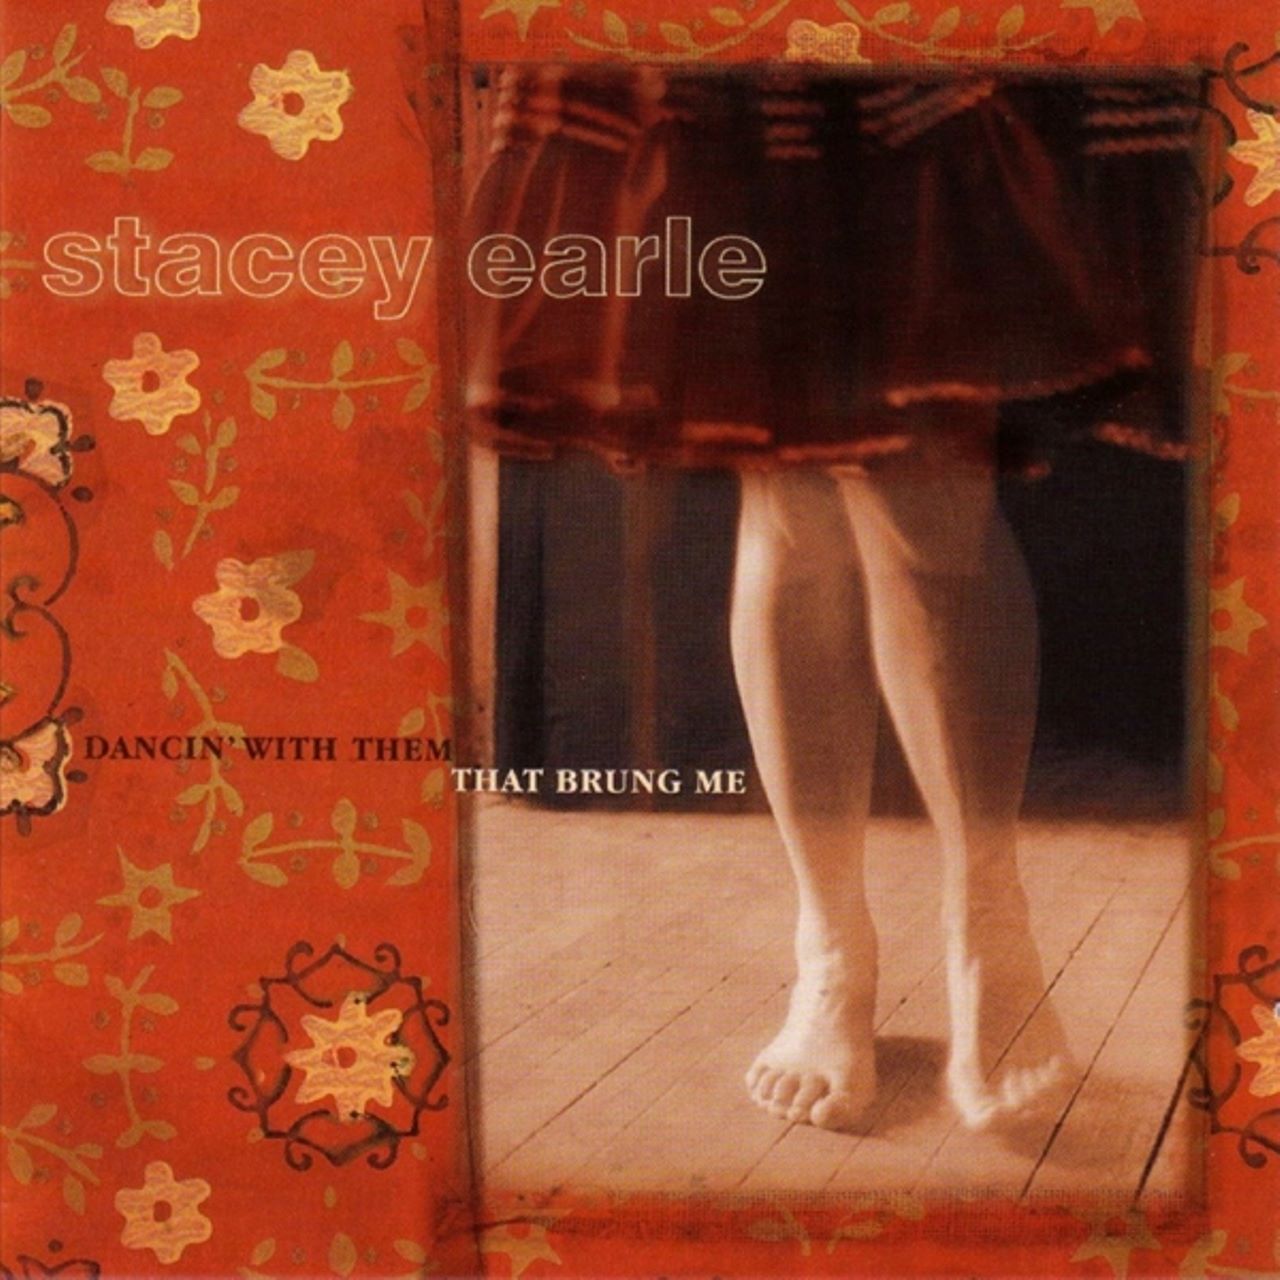 Stacey Earle - Dancin' With Them That Brung Me cover album